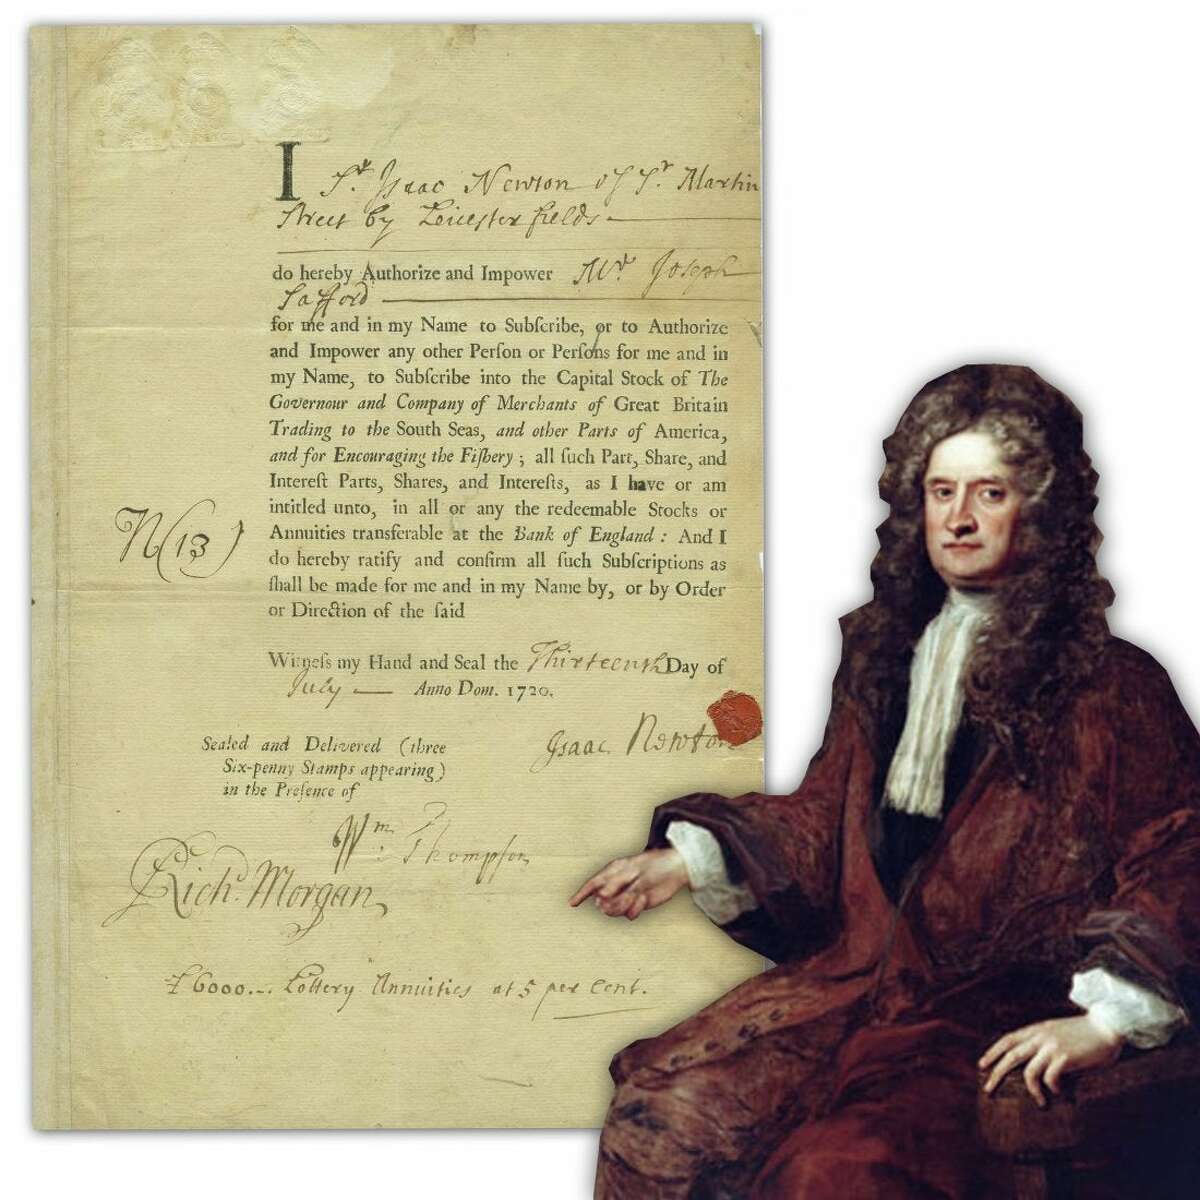 Partly printed and partly handwritten one-page document signed by Sir Isaac Newton, dated July 13, 1720, regarding his investment in the ill-fated South Seas Company.